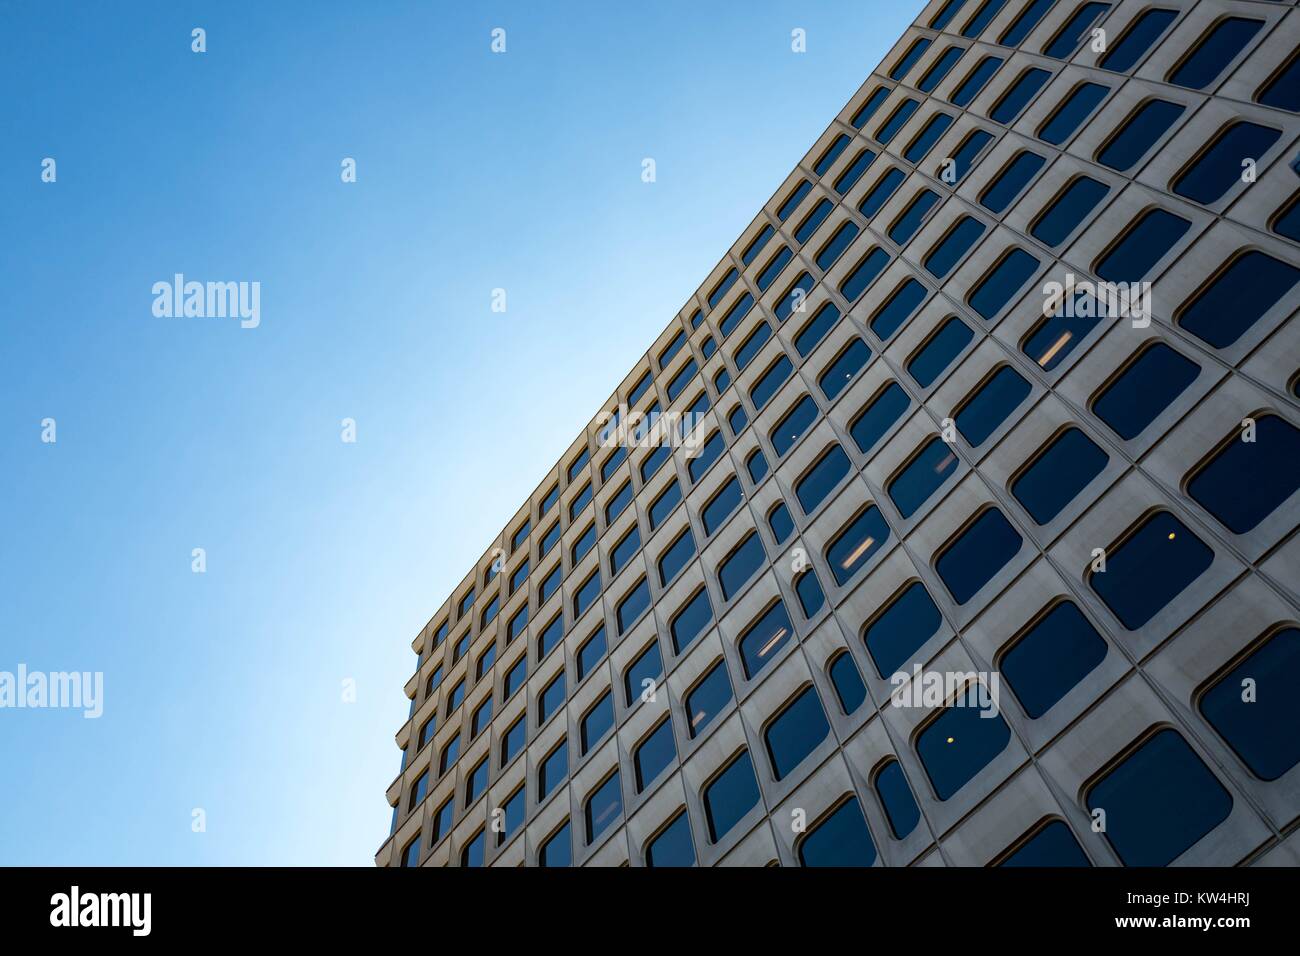 View up the side of the 444 Castro Street office building, home to business incubator 500 Startups, Redhat Inc, and several other technology companies, in the Silicon Valley town of Mountain View, California, August 24, 2016. Stock Photo